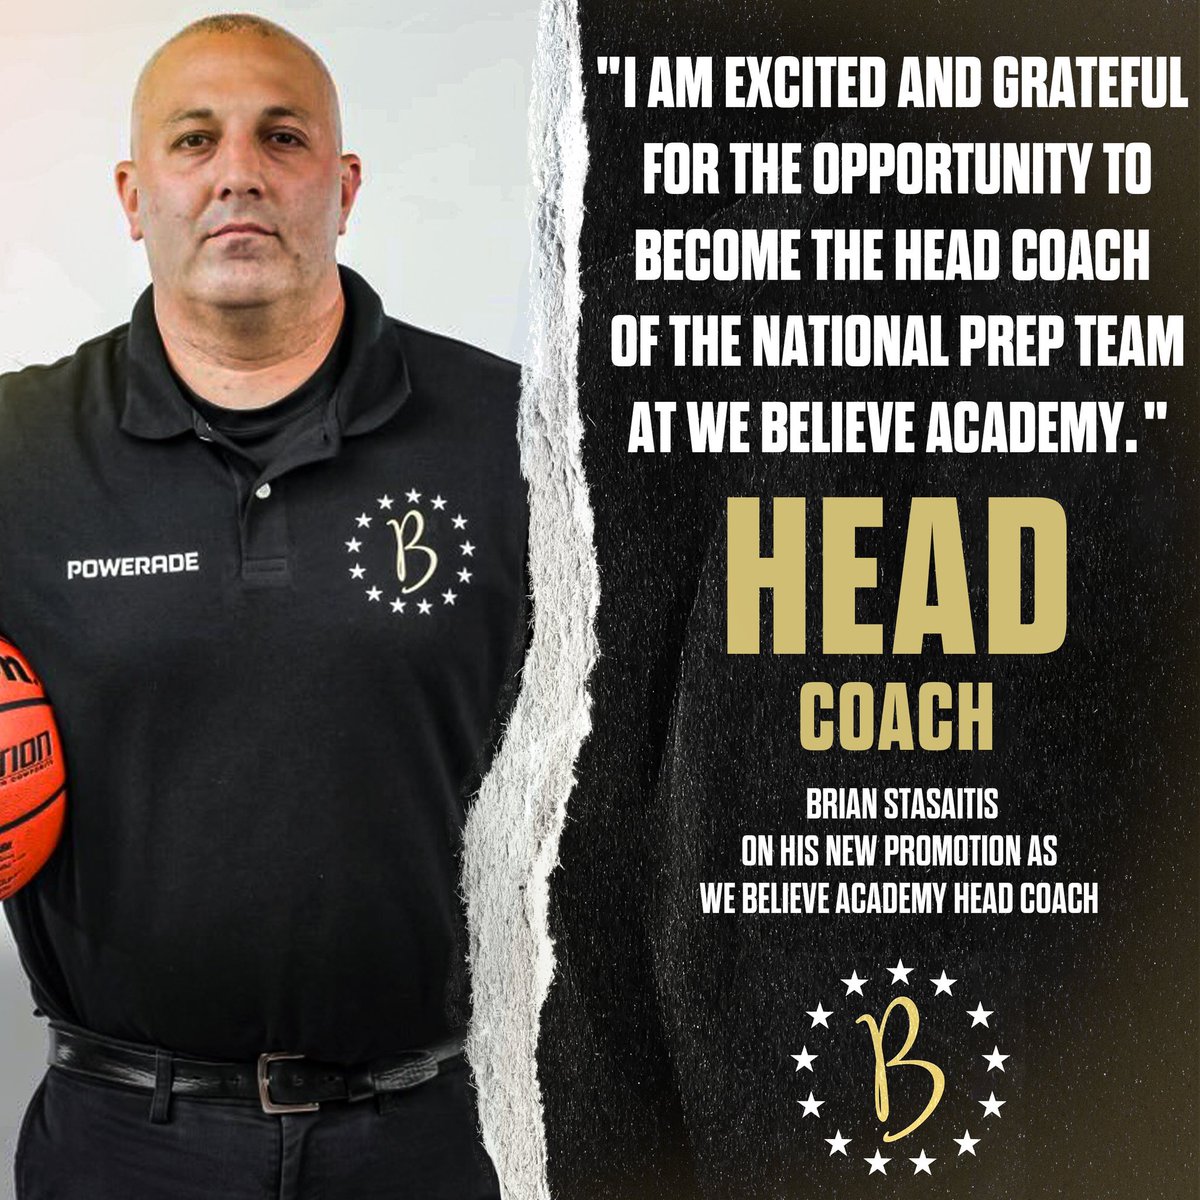 🚨ANNOUNCEMENT🚨 We Are Excited To Announce the promotion of Brian Stasaitis @CoachStasaitis from our associate head coach to our new Head Coach for our National Prep Team … Congrats Coach!! #WeBelieveHoops